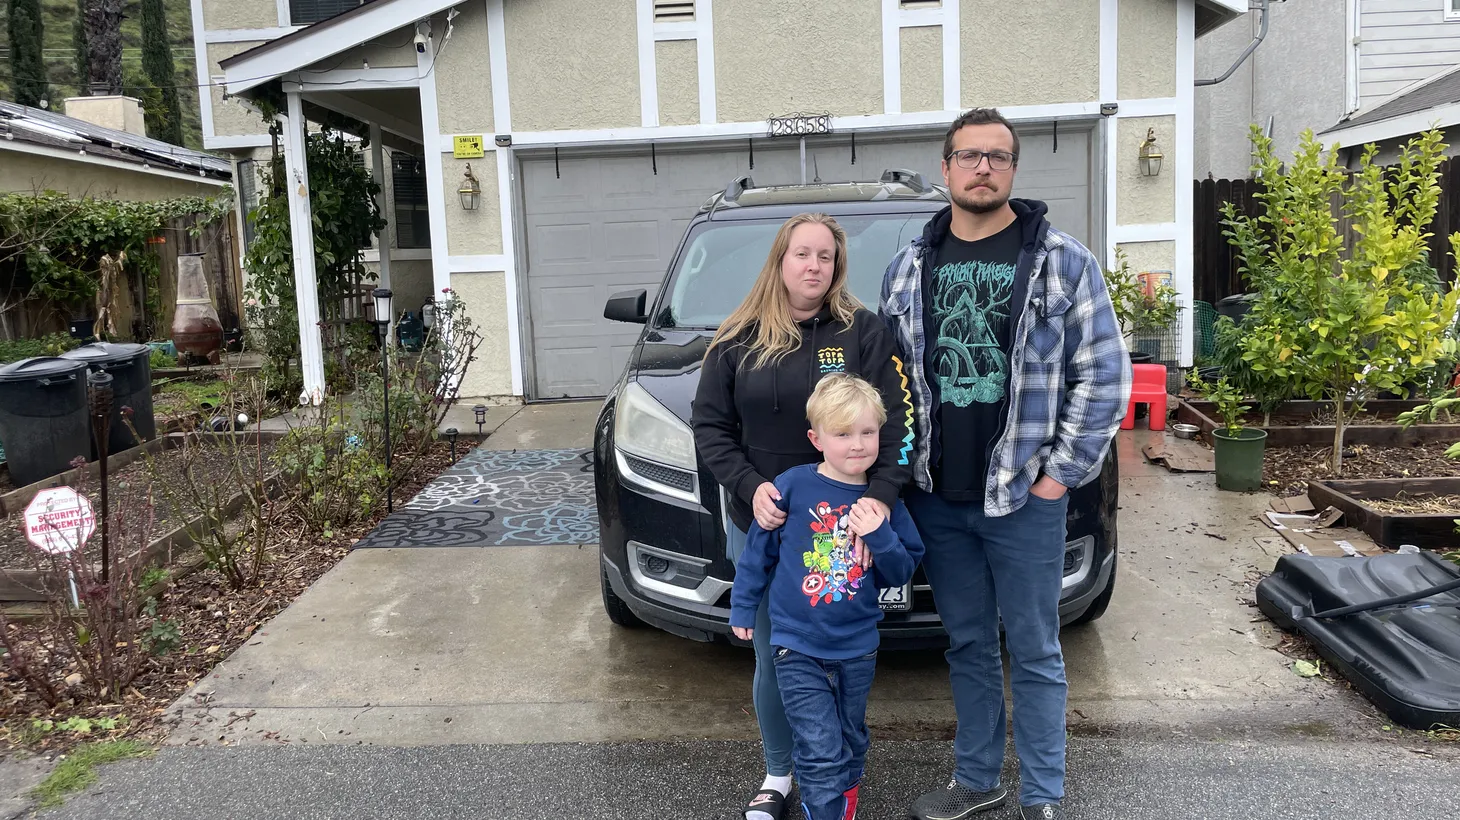 Jennifer Elkins says her youngest son (center) and his two siblings get bloody noses regularly, and they run to the car covering their mouths (because the air smells so putrid) when she picks them up from school.